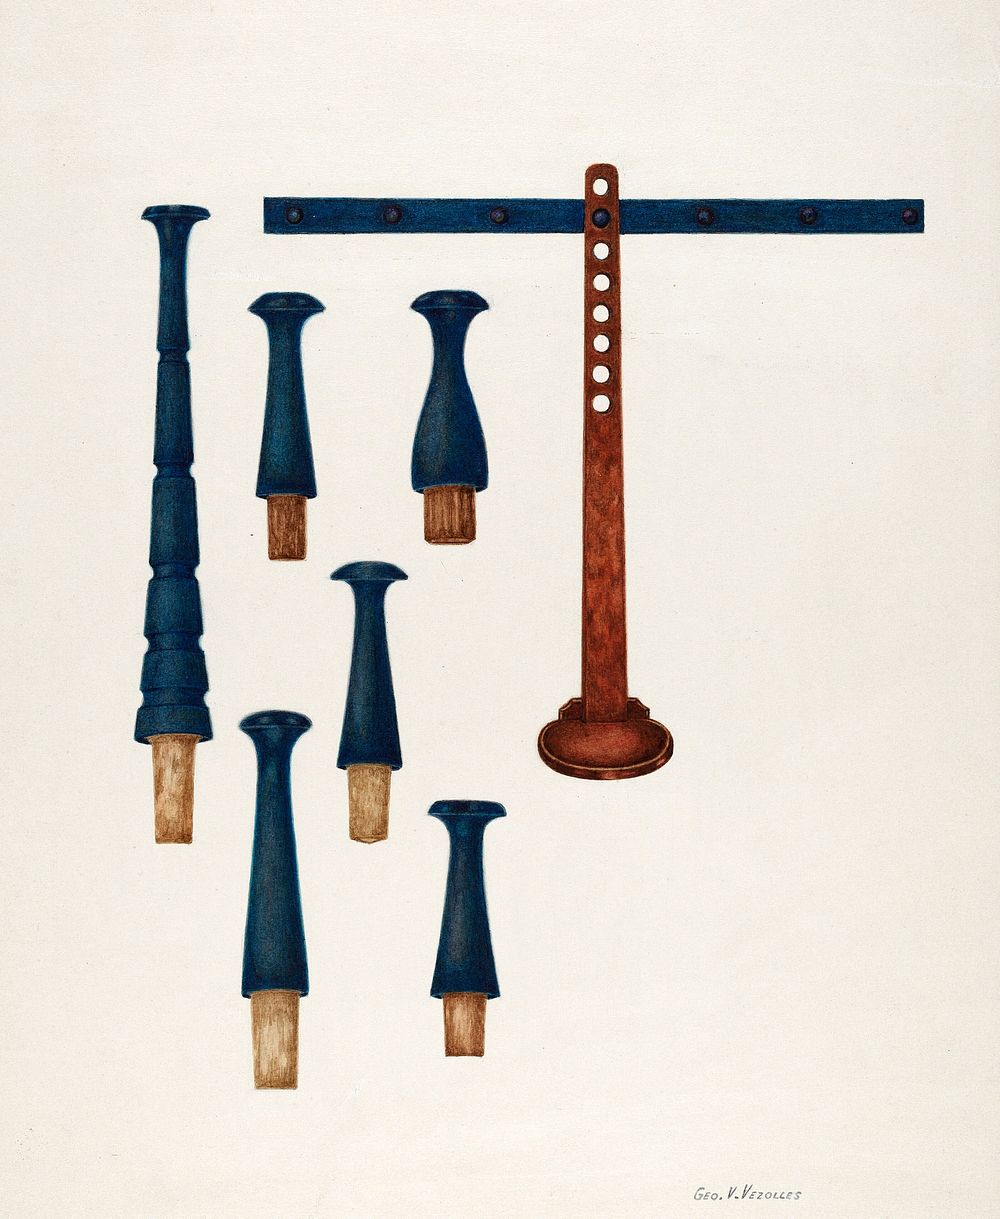 Shaker Pegs and Candlestand (ca.1938) by George V. Vezolles. Original from The National Gallery of Art. Digitally enhanced…